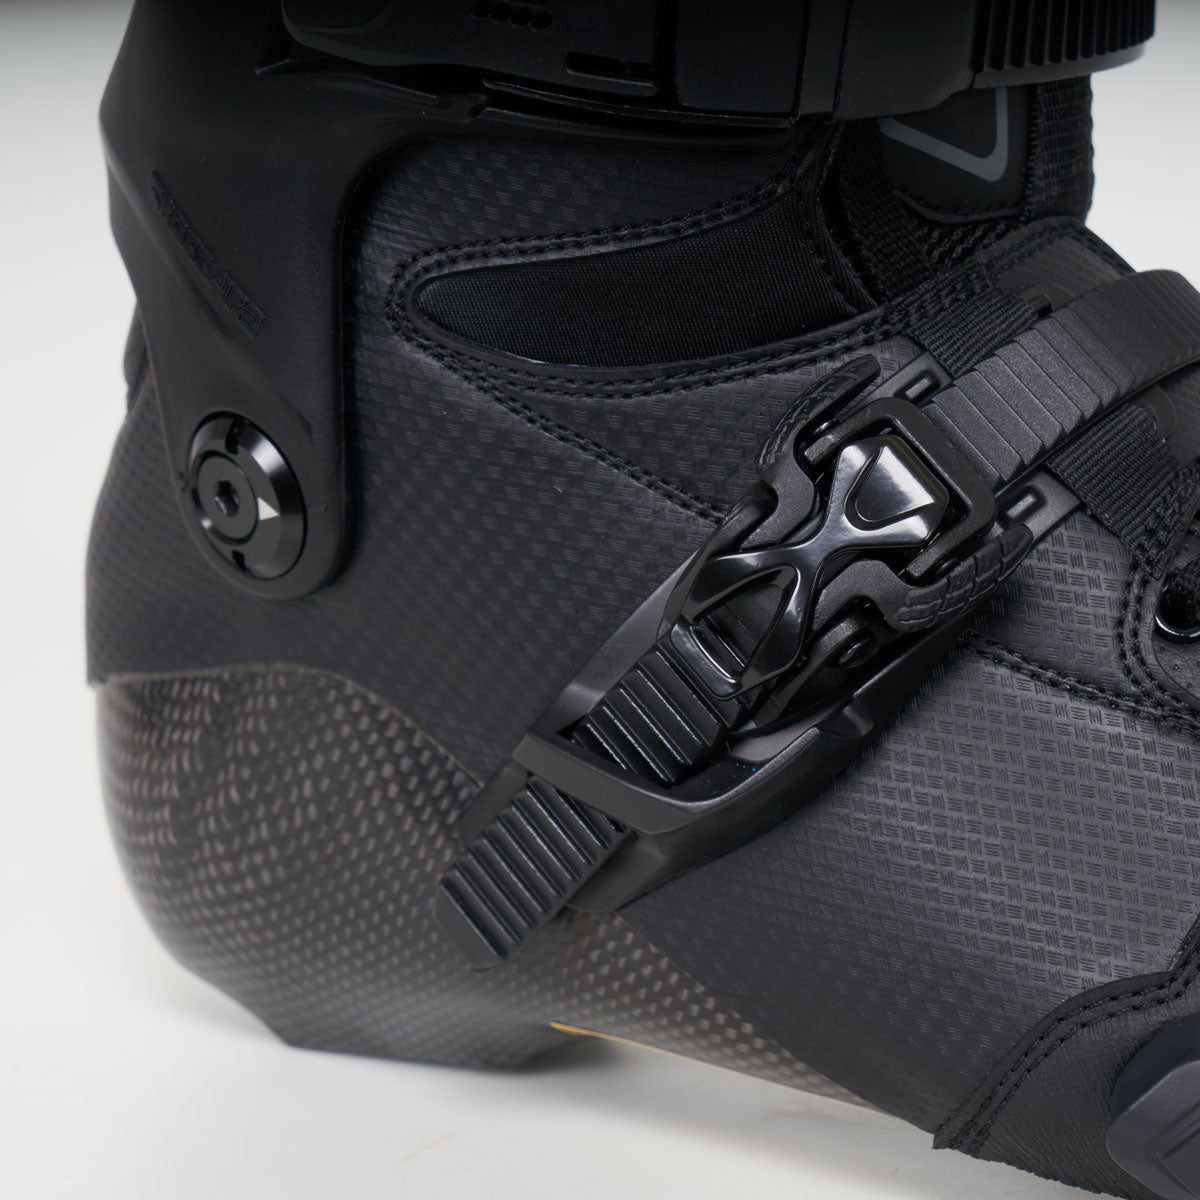 Rollerblade Crossfire Skates [Boot Only]